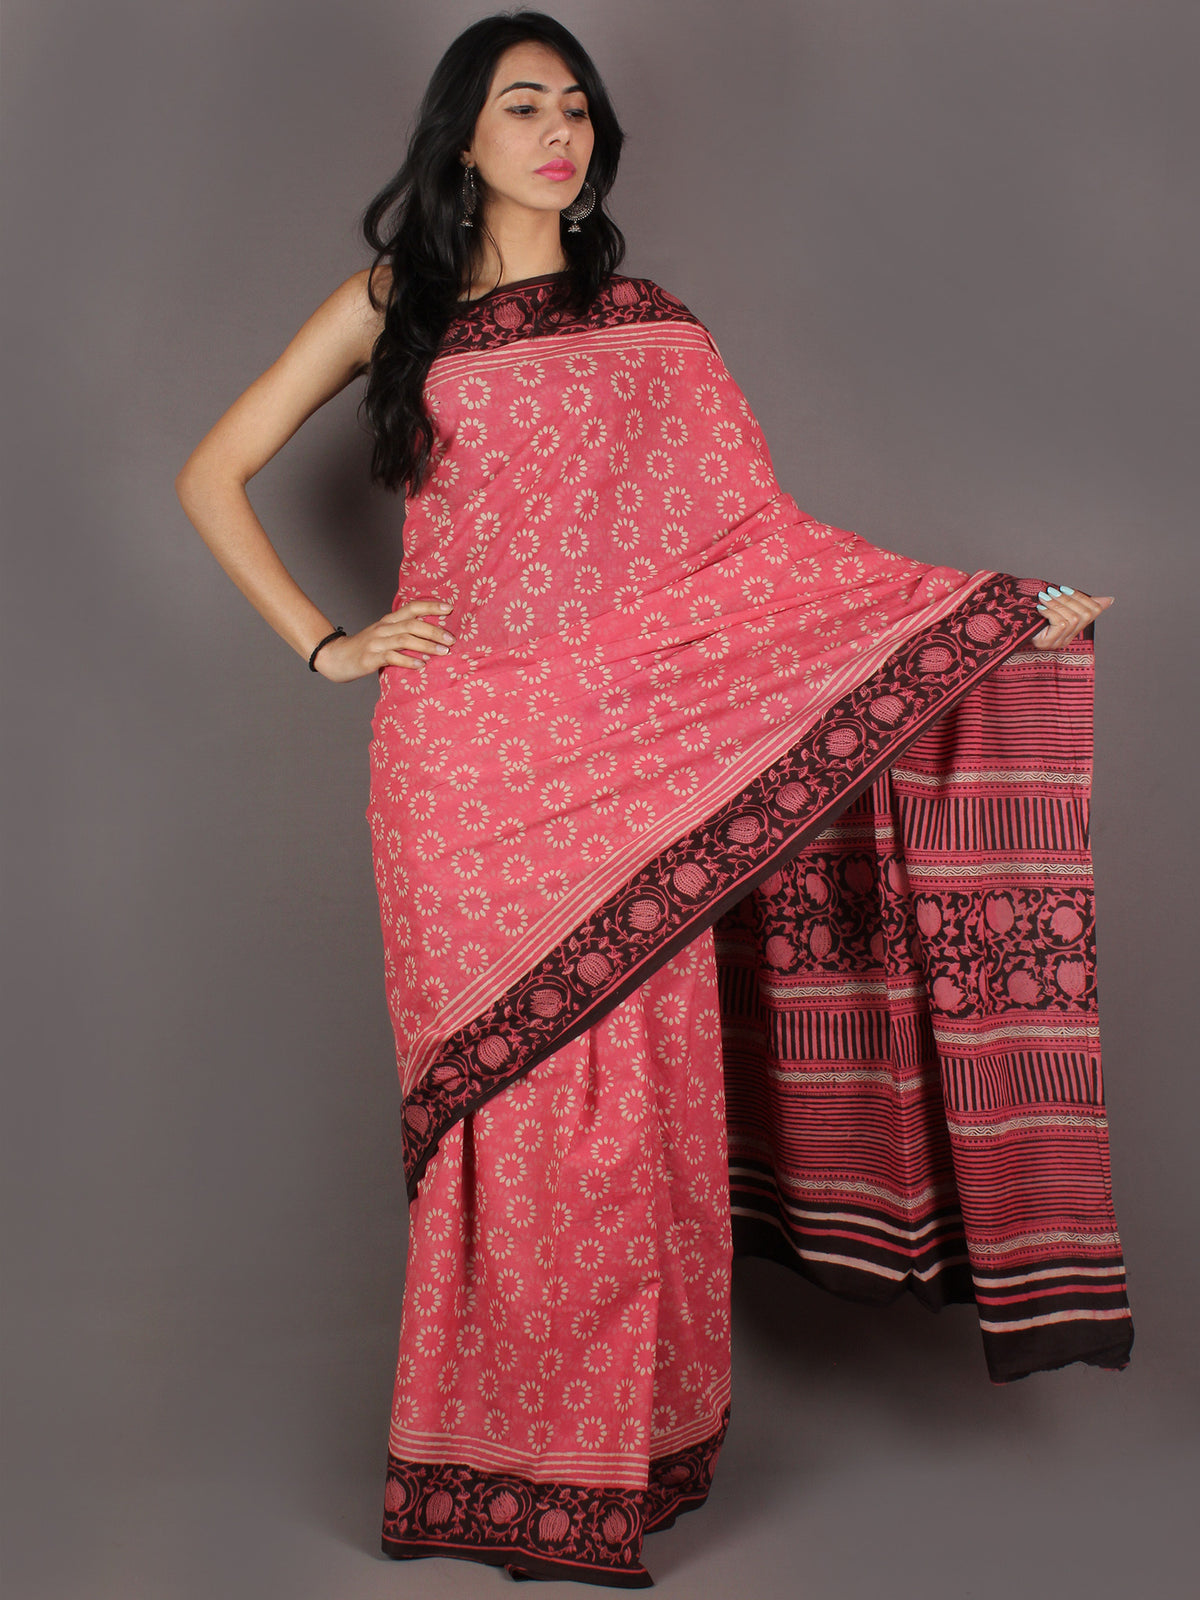 Pink White Brown Hand Block Printed in Natural Colors Cotton Mul Saree - S03170912